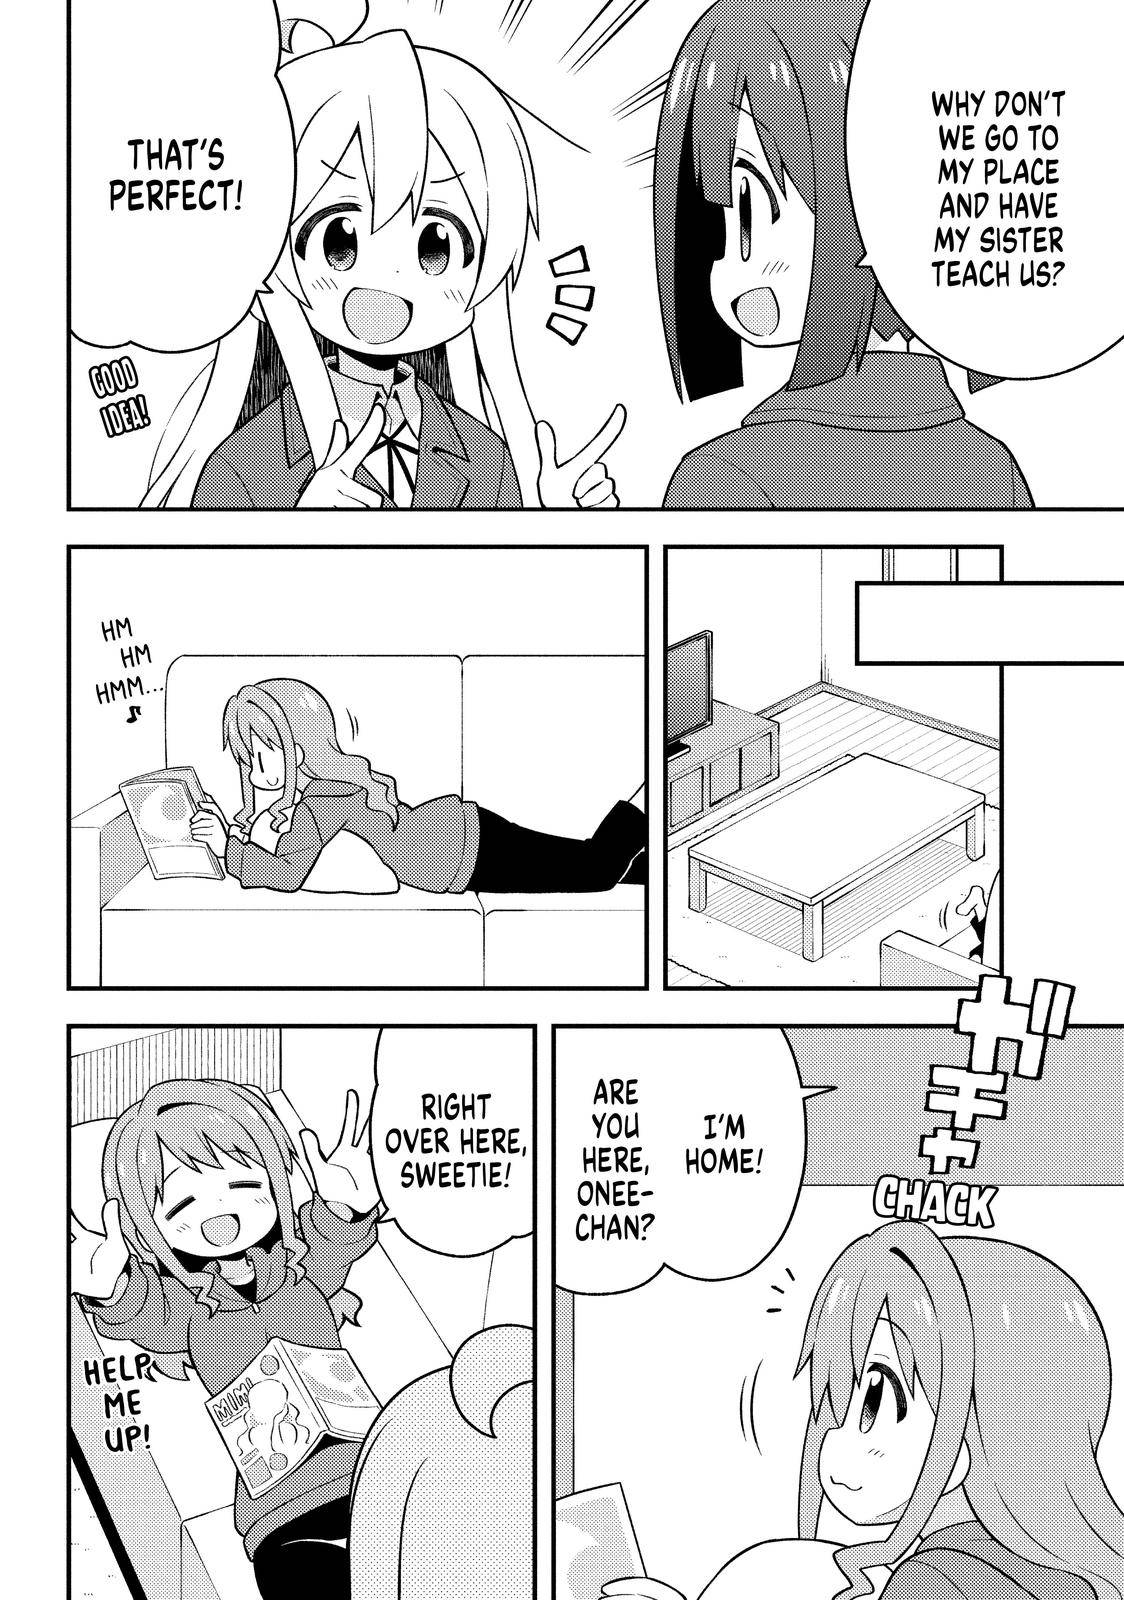 ONIMAI - I'm Now Your Sister! - chapter 26 - #6